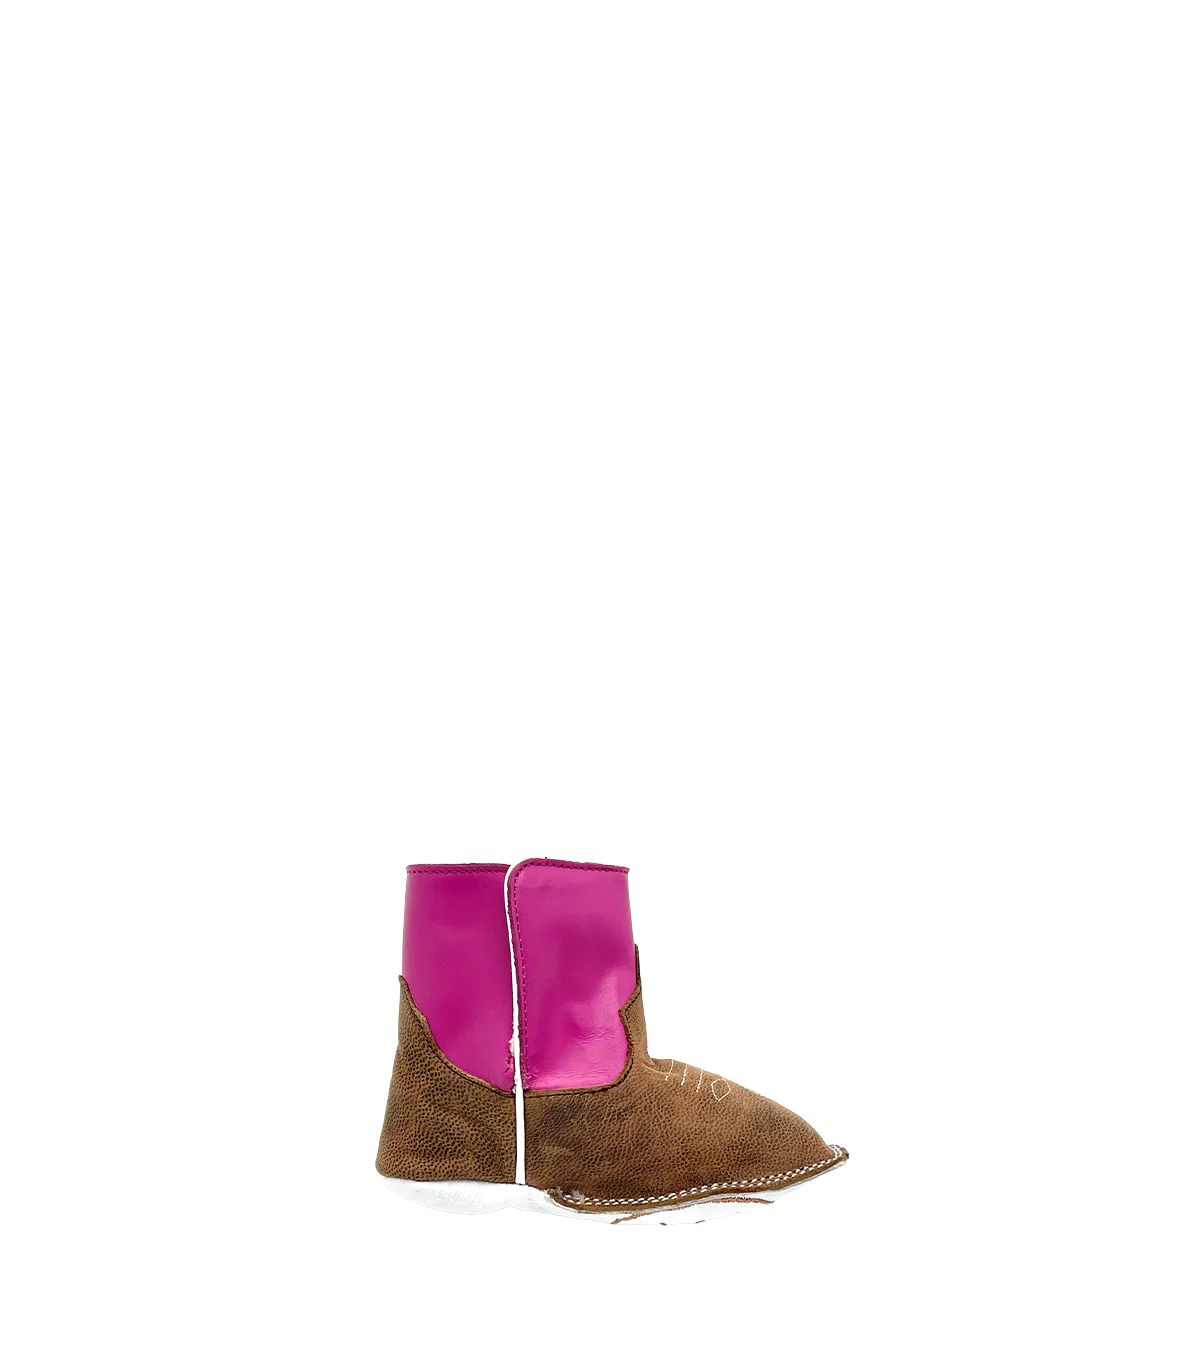 Miron Crosby Pink Baby Bootie | Luxury Fashion Kid's Cowboy Boots | Miron Crosby | Miron Crosby